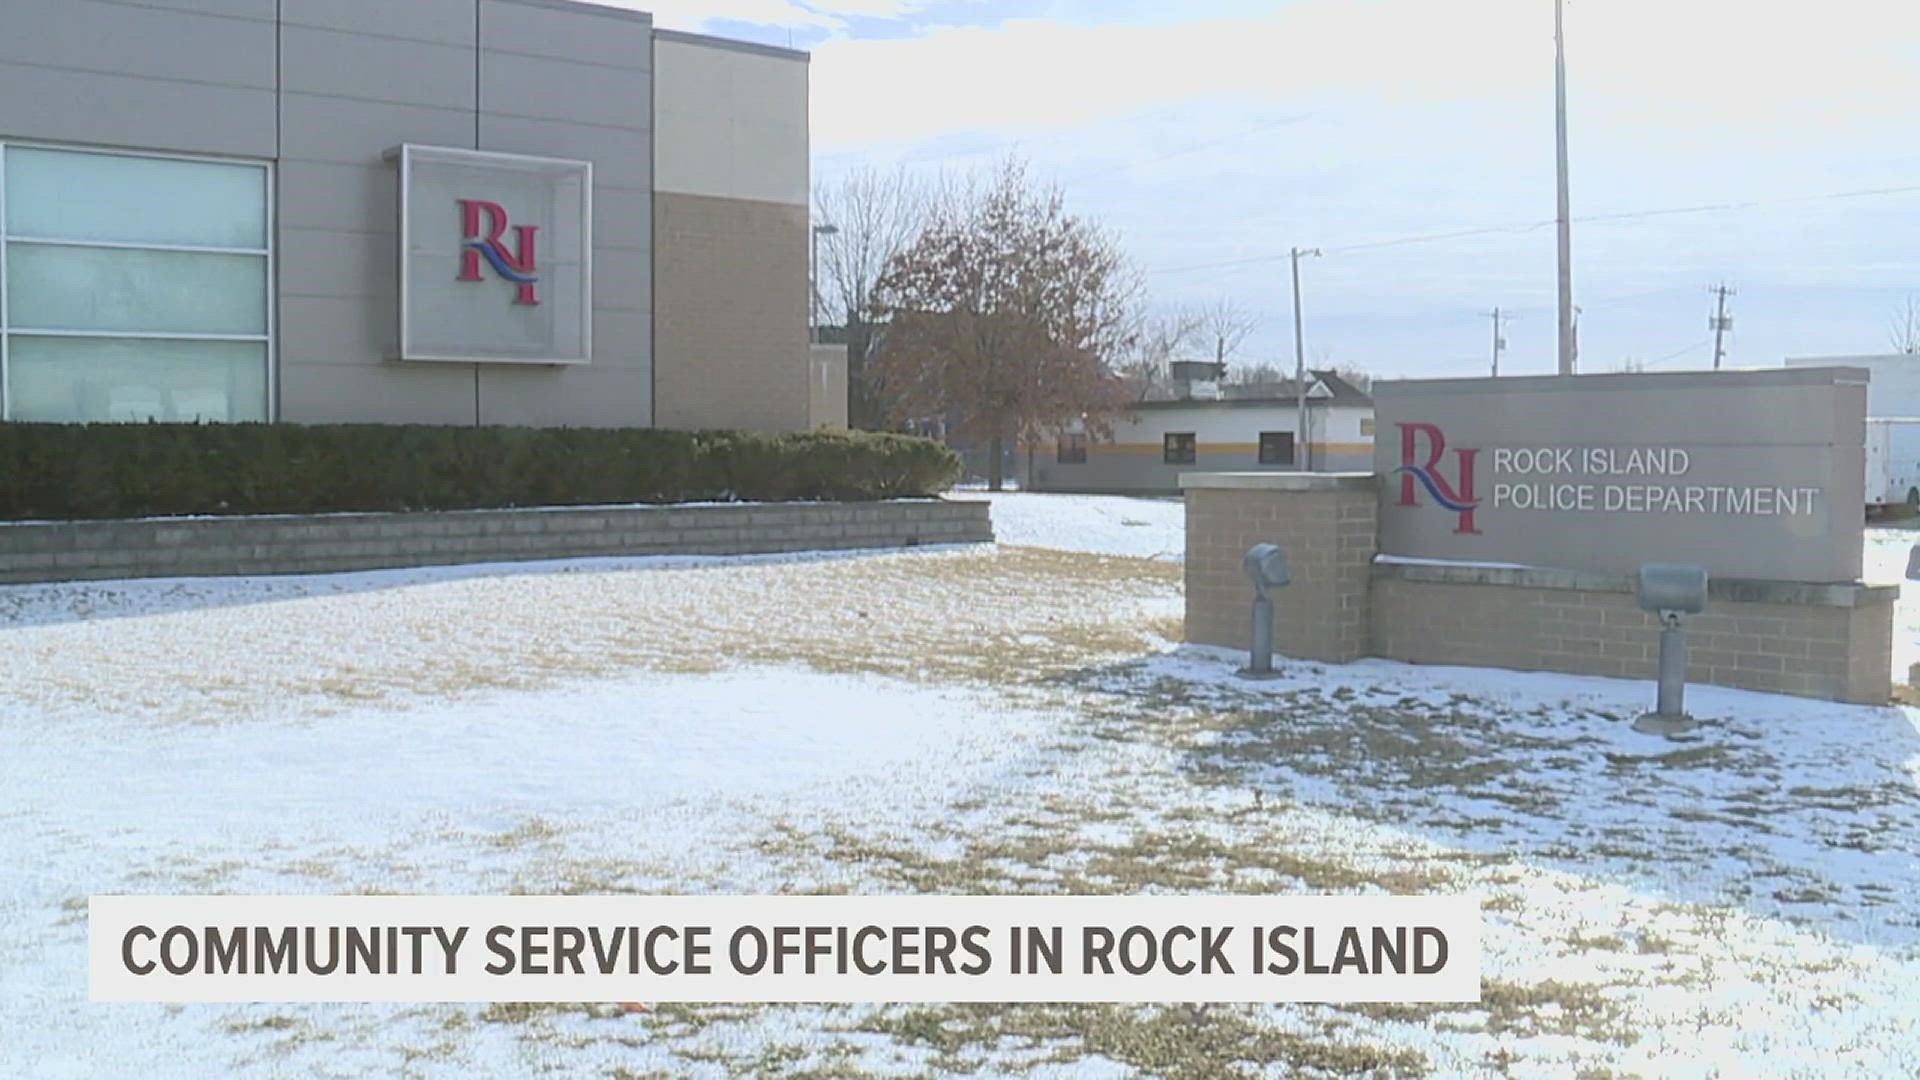 This comes as Rock Island hopes to increase its number of officers due to shortages departments are experiencing.